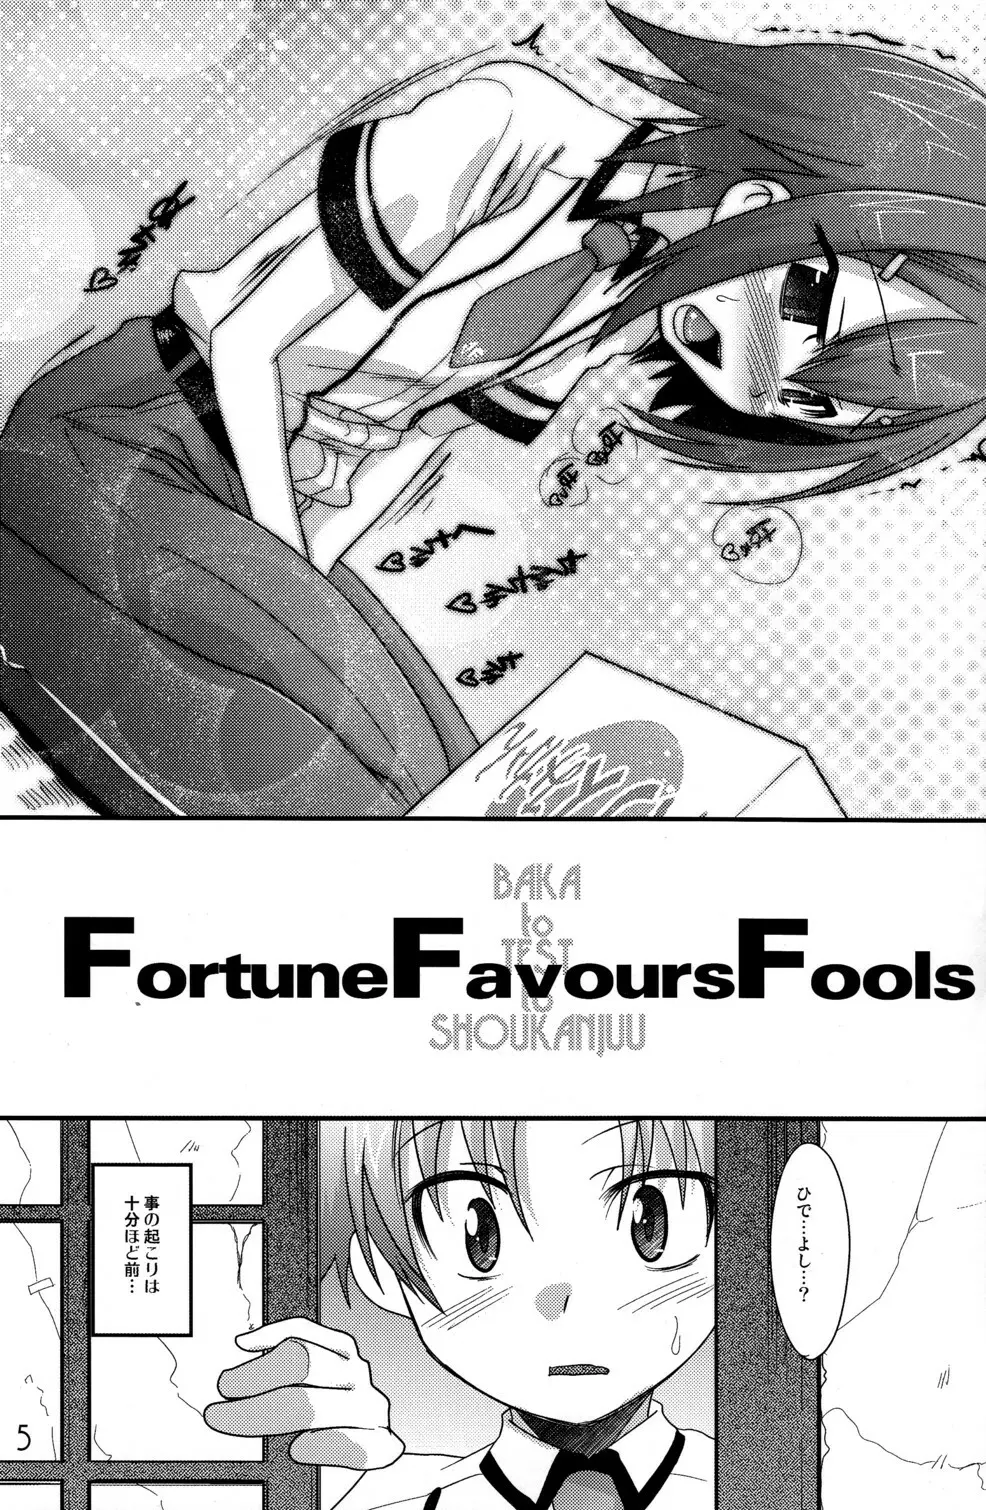 Fortune Favours Fools - page4